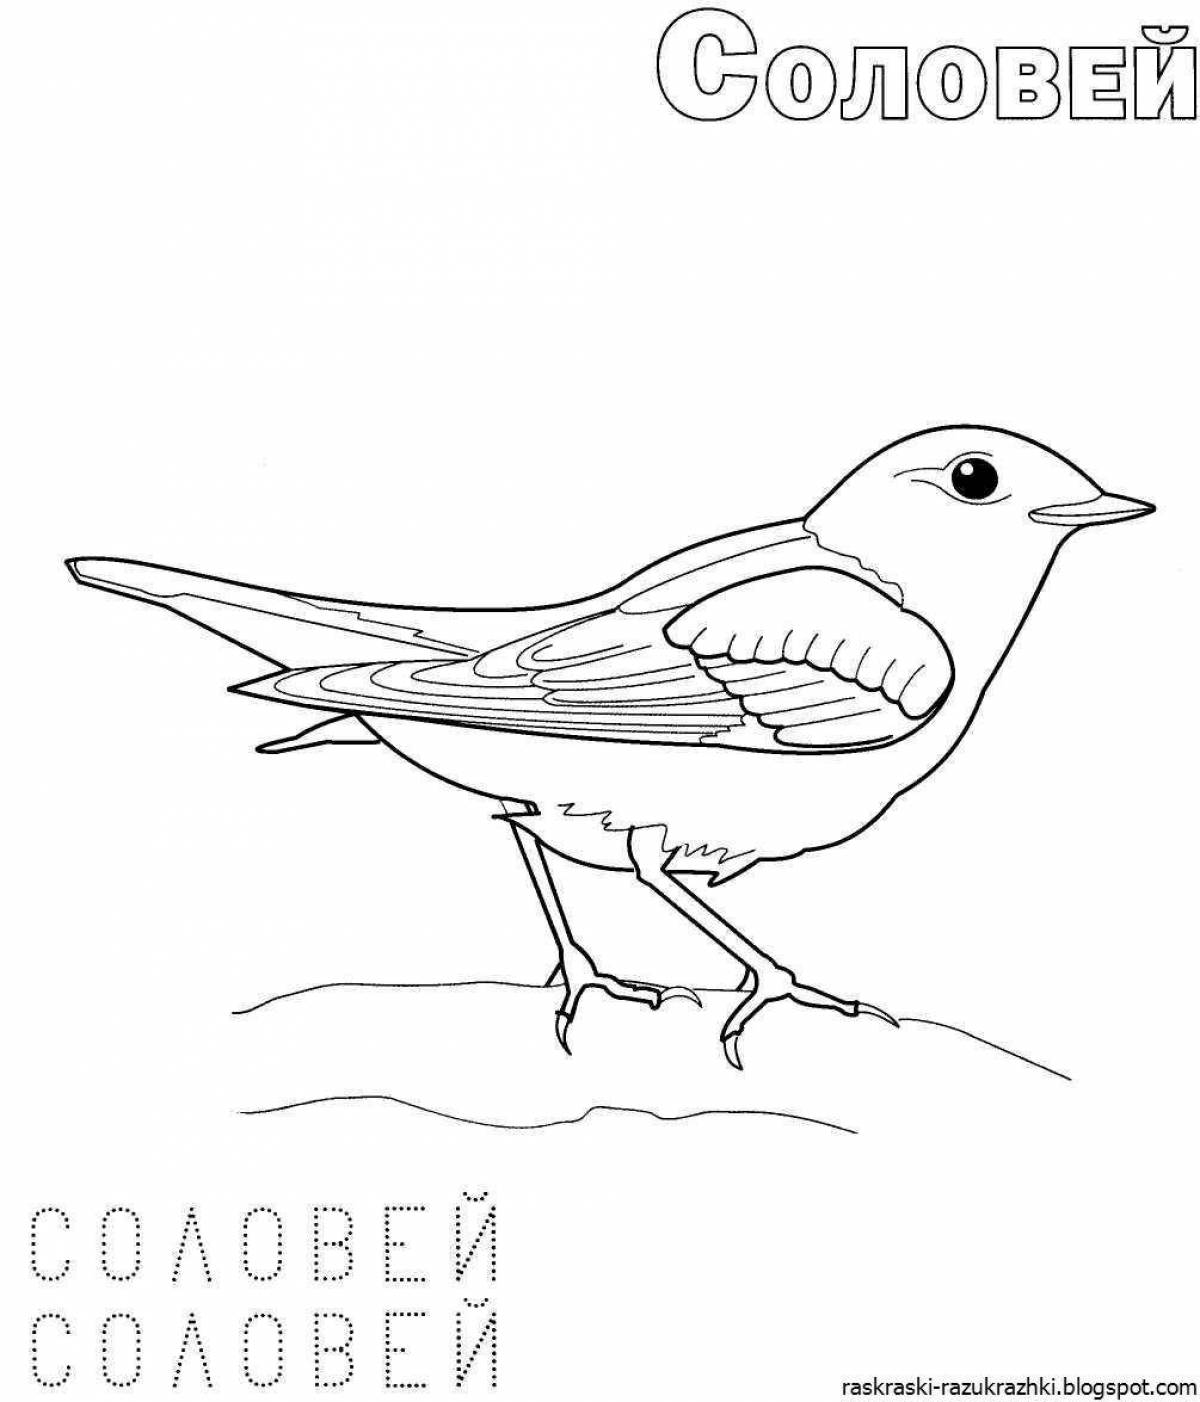 Colourful coloring pages of migratory birds for children 6-7 years old